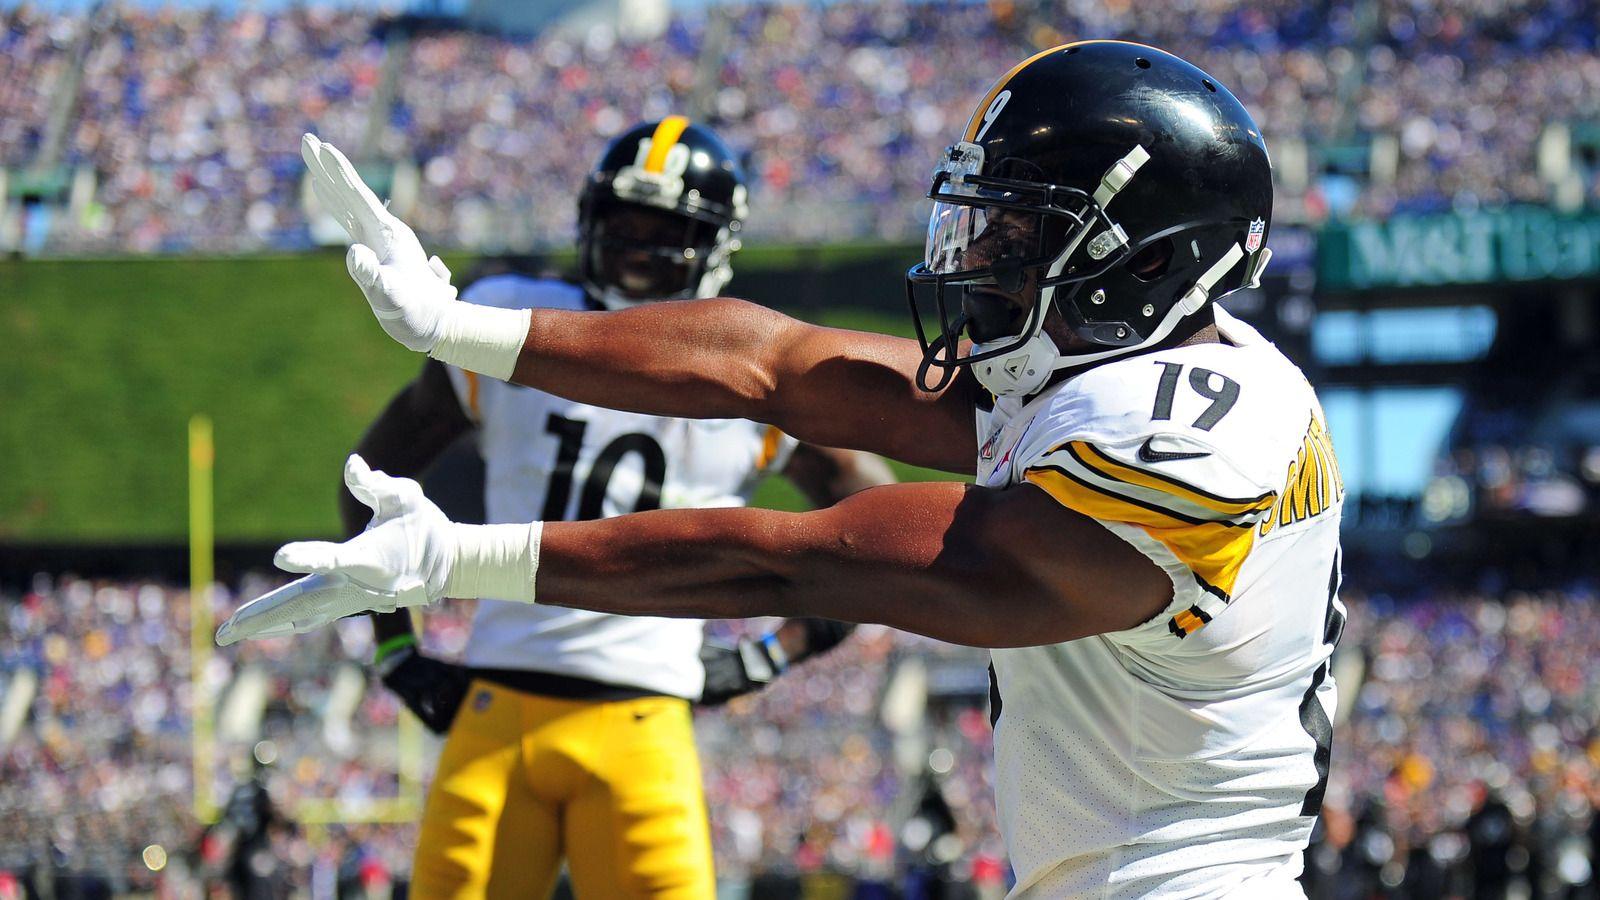 Steelers WR does 'Dragon Ball Z' celebration after TD catch